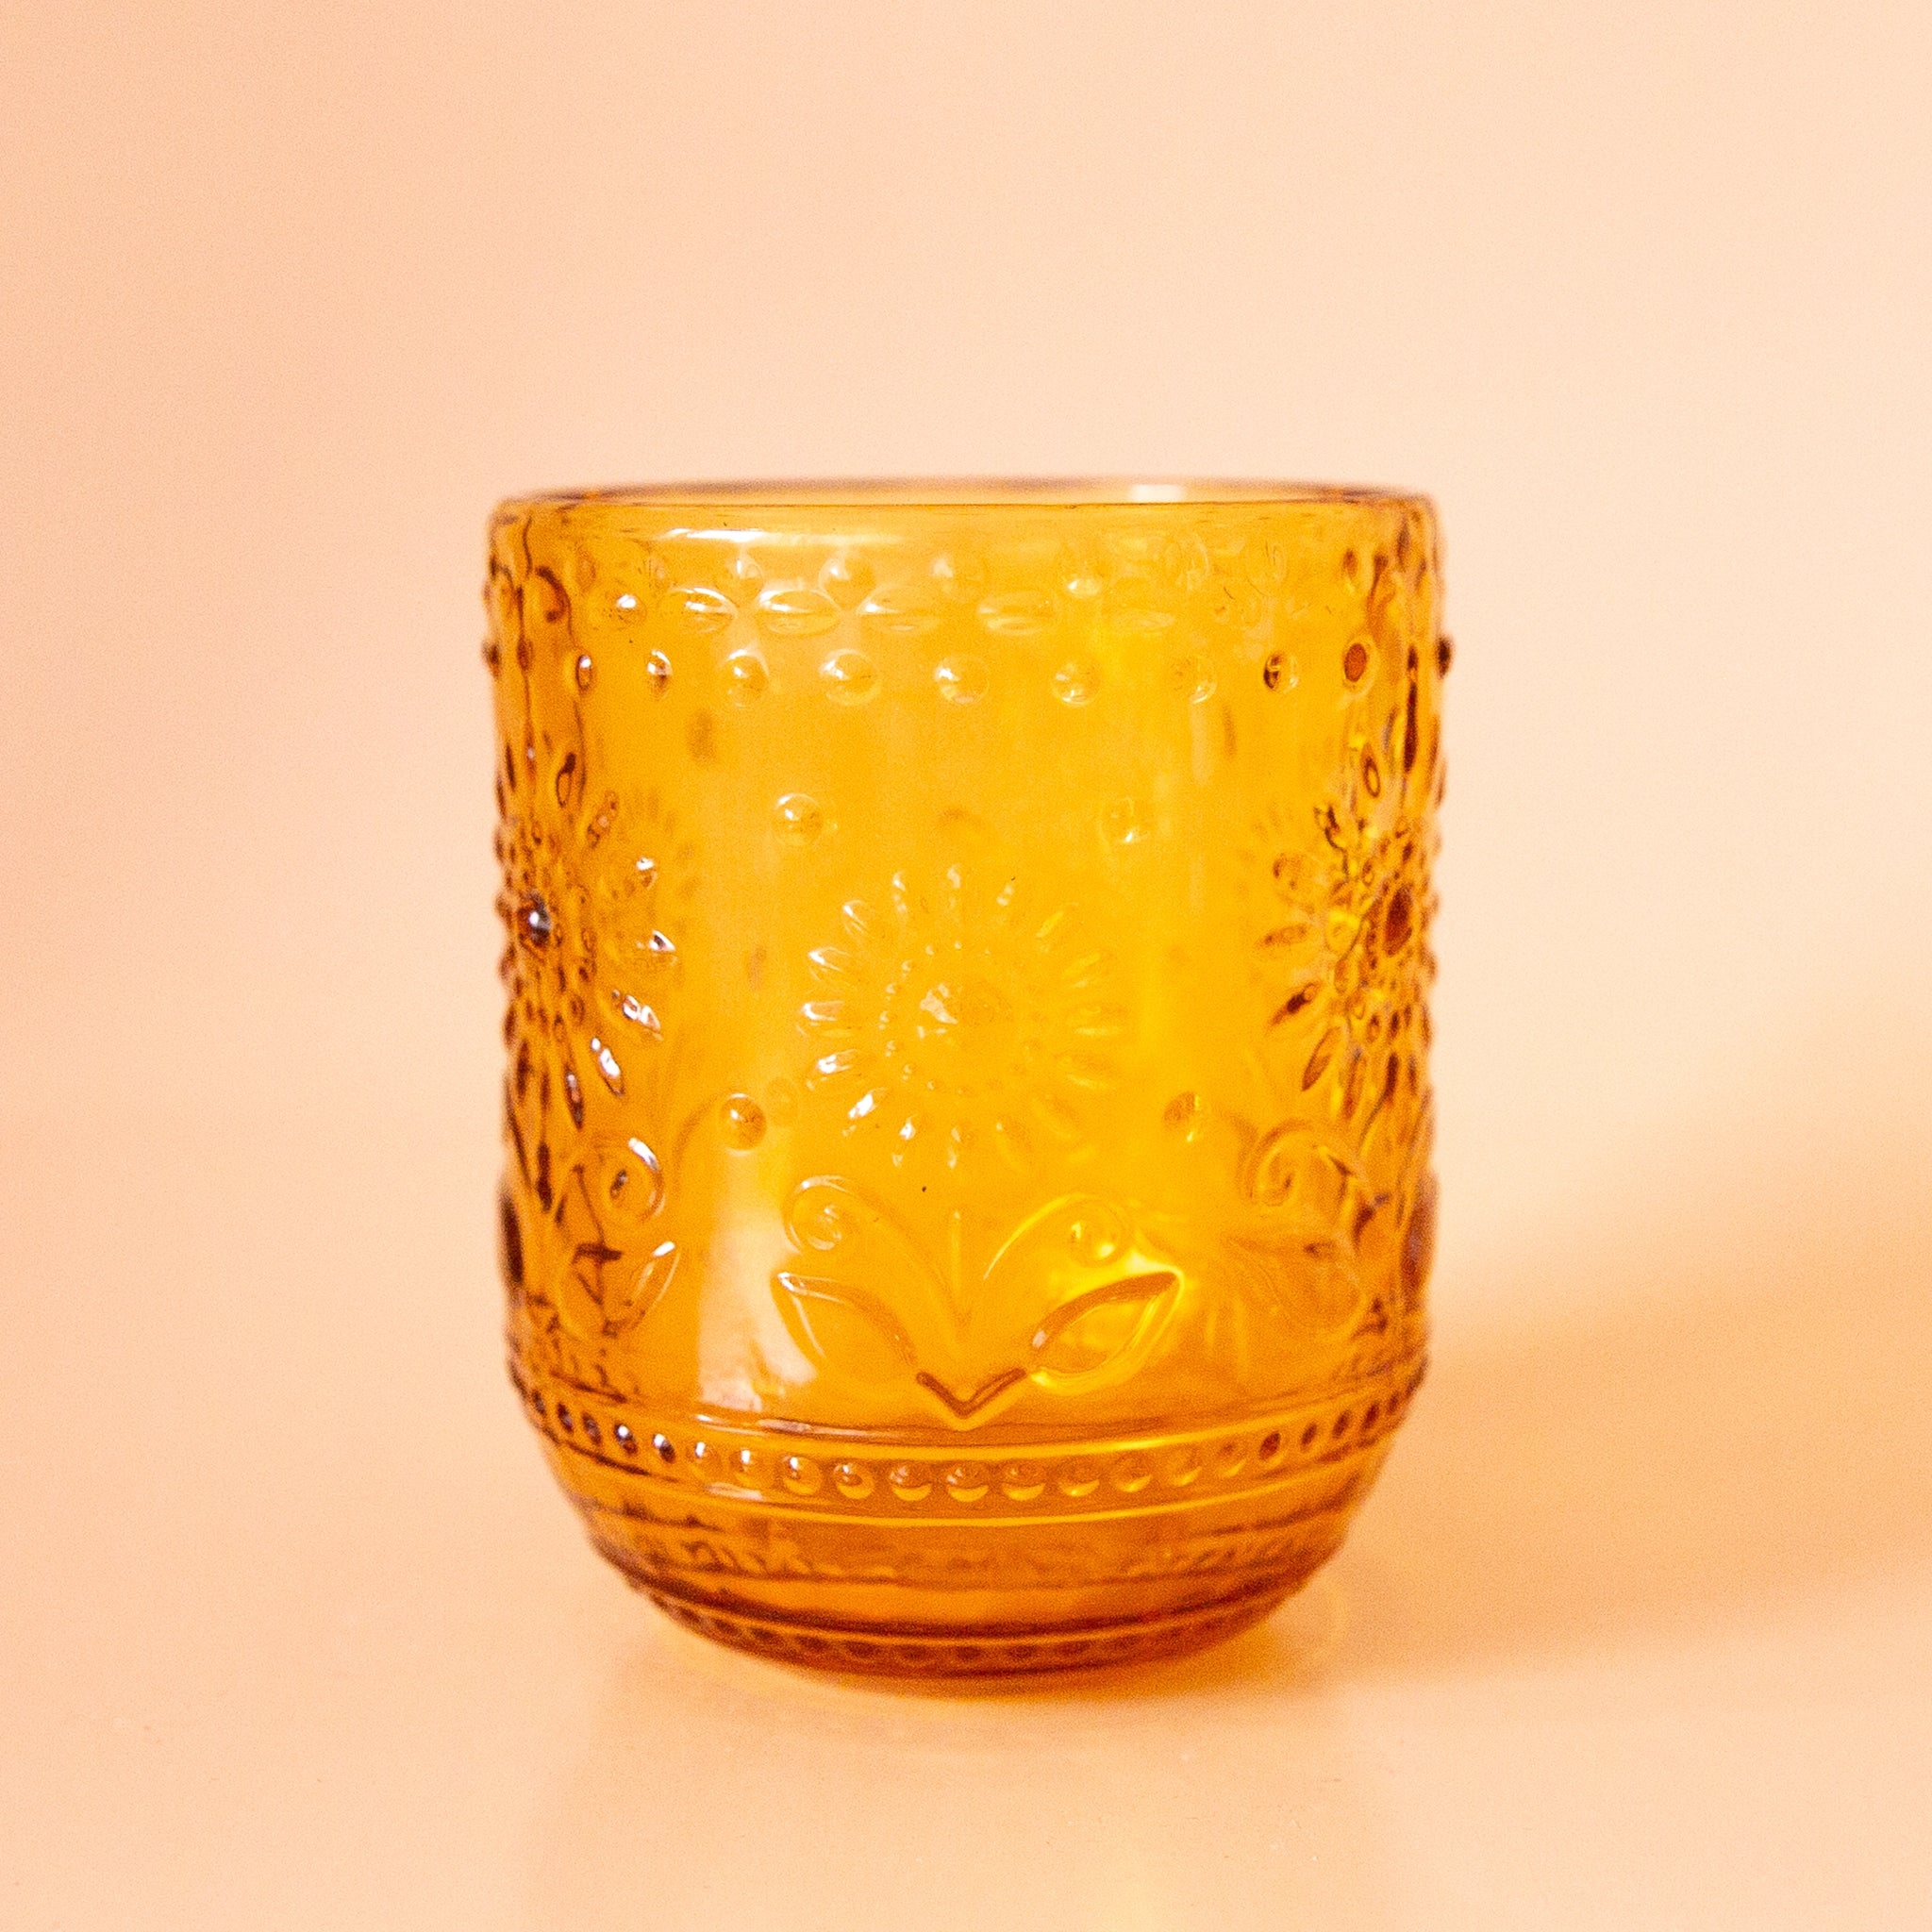 On a peachy background is an embossed yellow drinking glass with raised floral detailing.